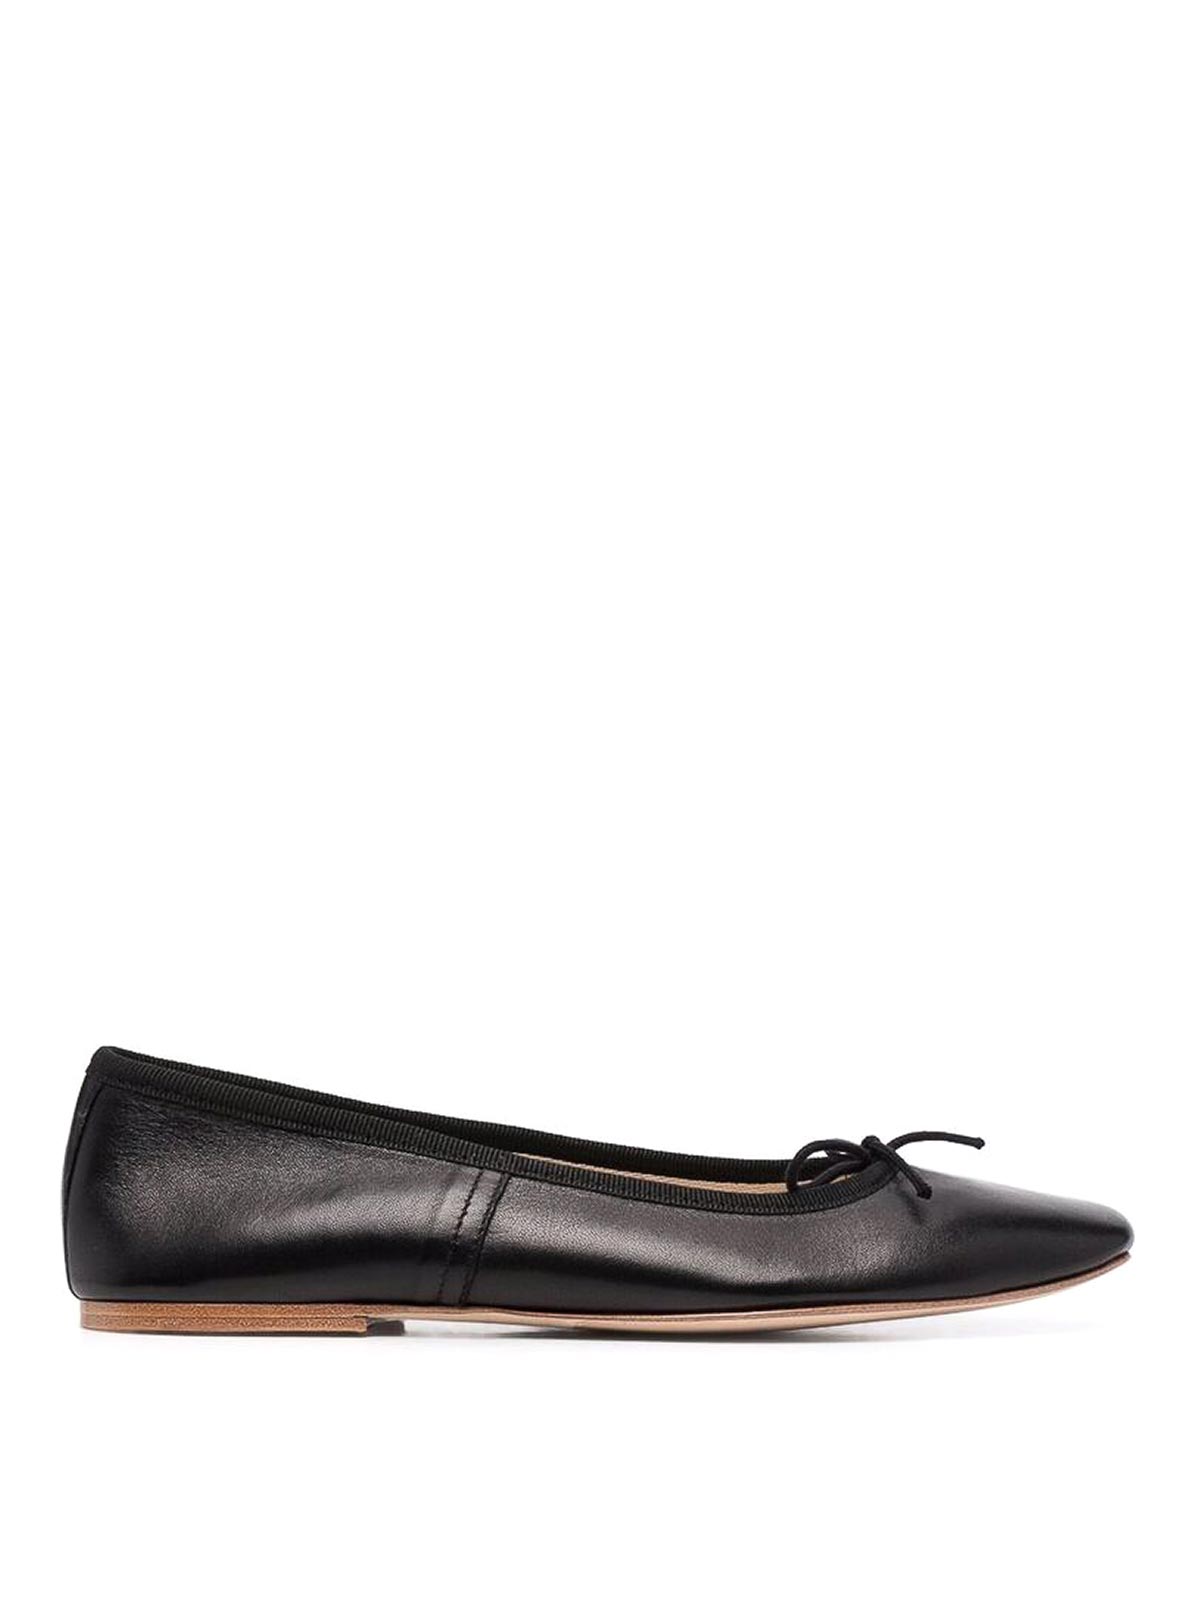 Shop Apc Black Ballerina Shoes With Bow Detailing